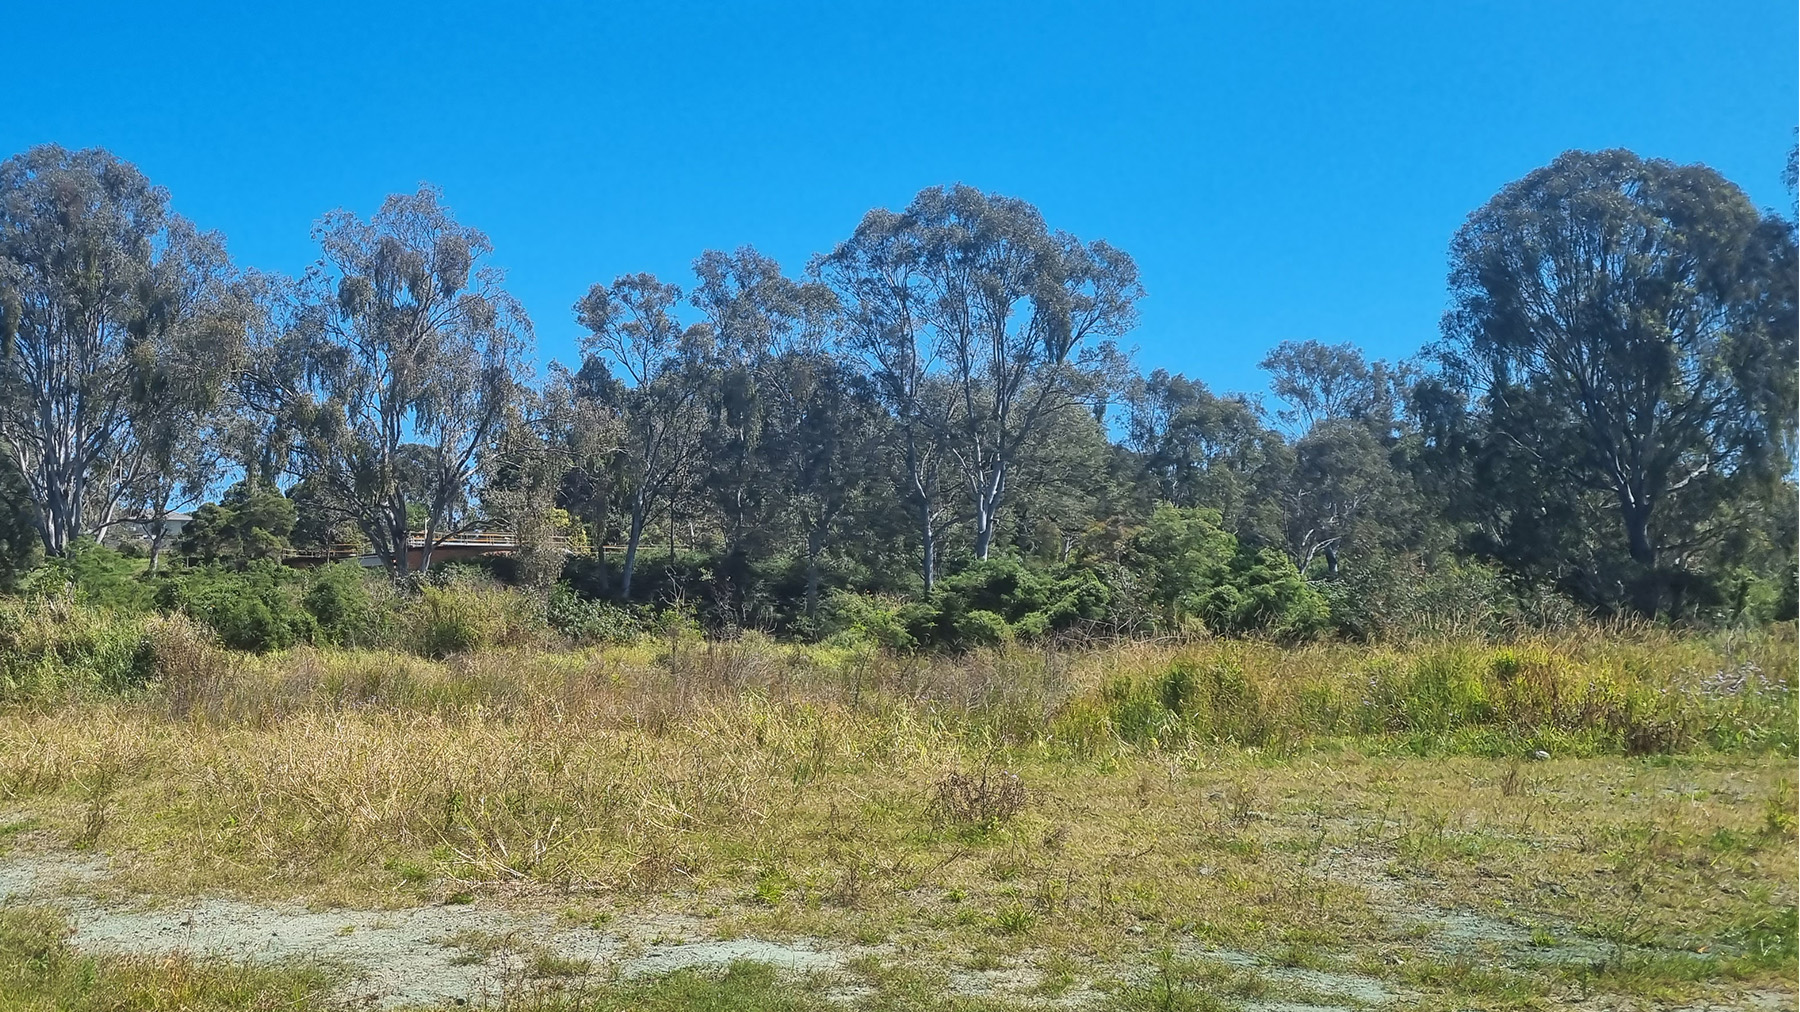 Image of bushy landscape with a grassy plain in the foreground and large gum trees in the background.